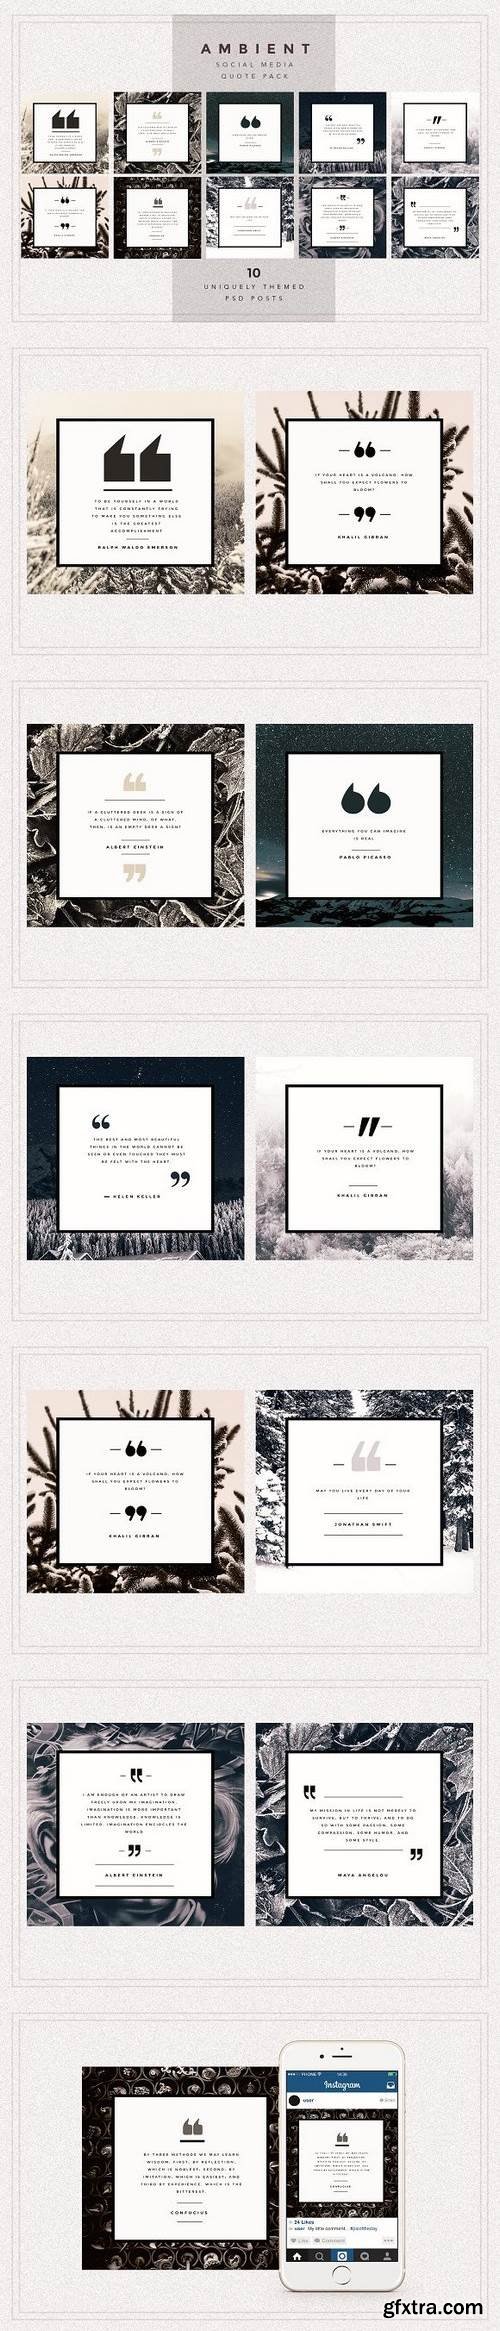 CM - AMBIENT Social Media quote pack 1308486